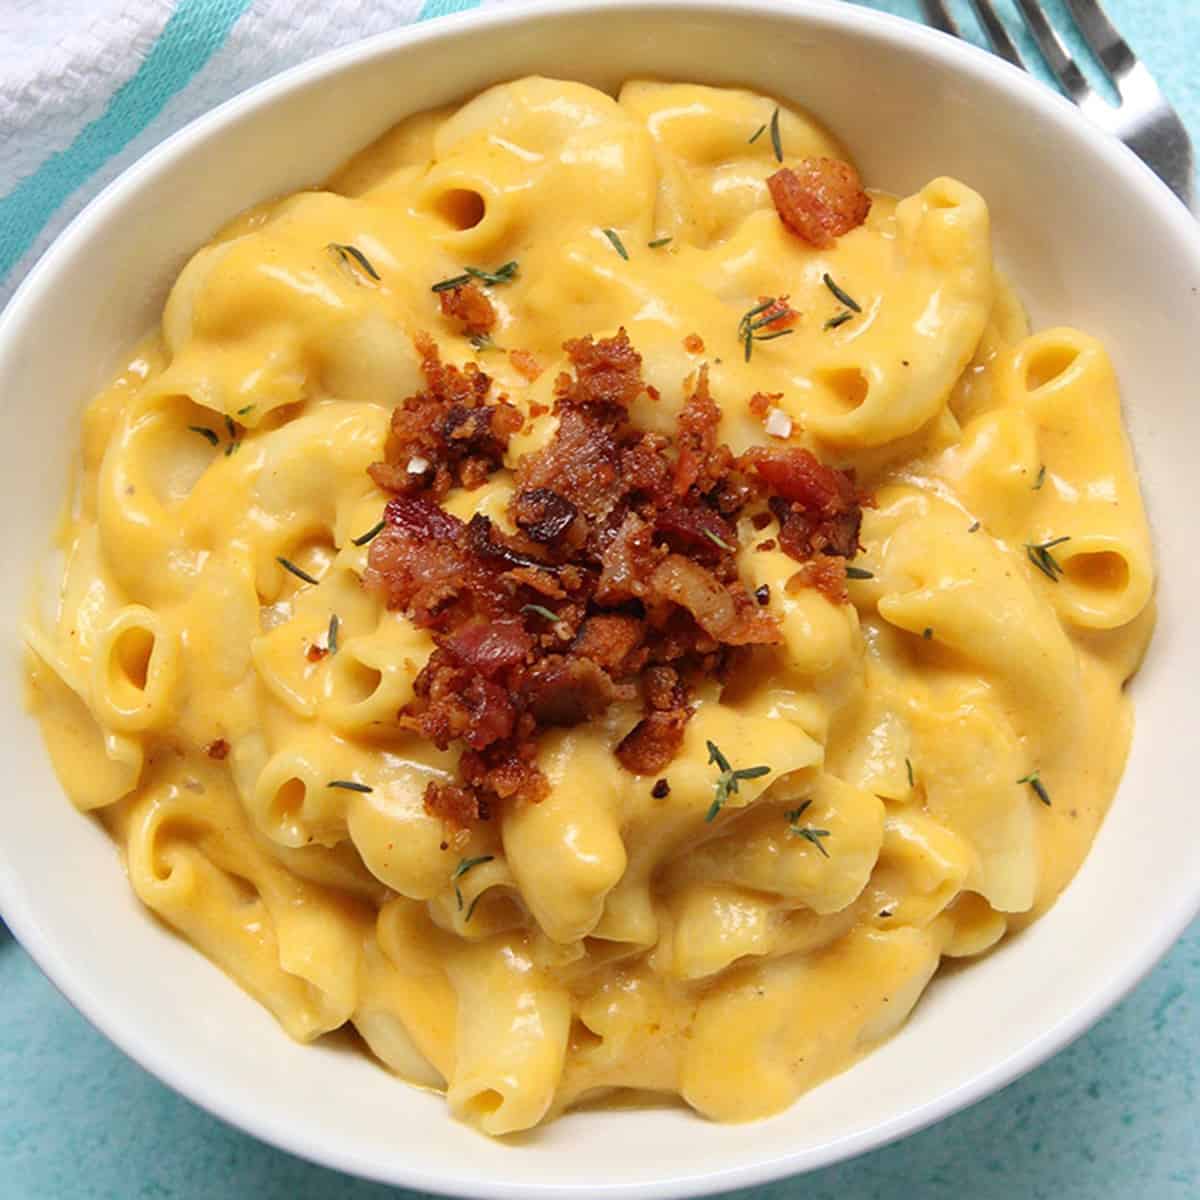 https://urbanblisslife.com/wp-content/uploads/2022/06/Dairy-Free-Mac-and-Cheese-FEATURE-SQUARE.jpg